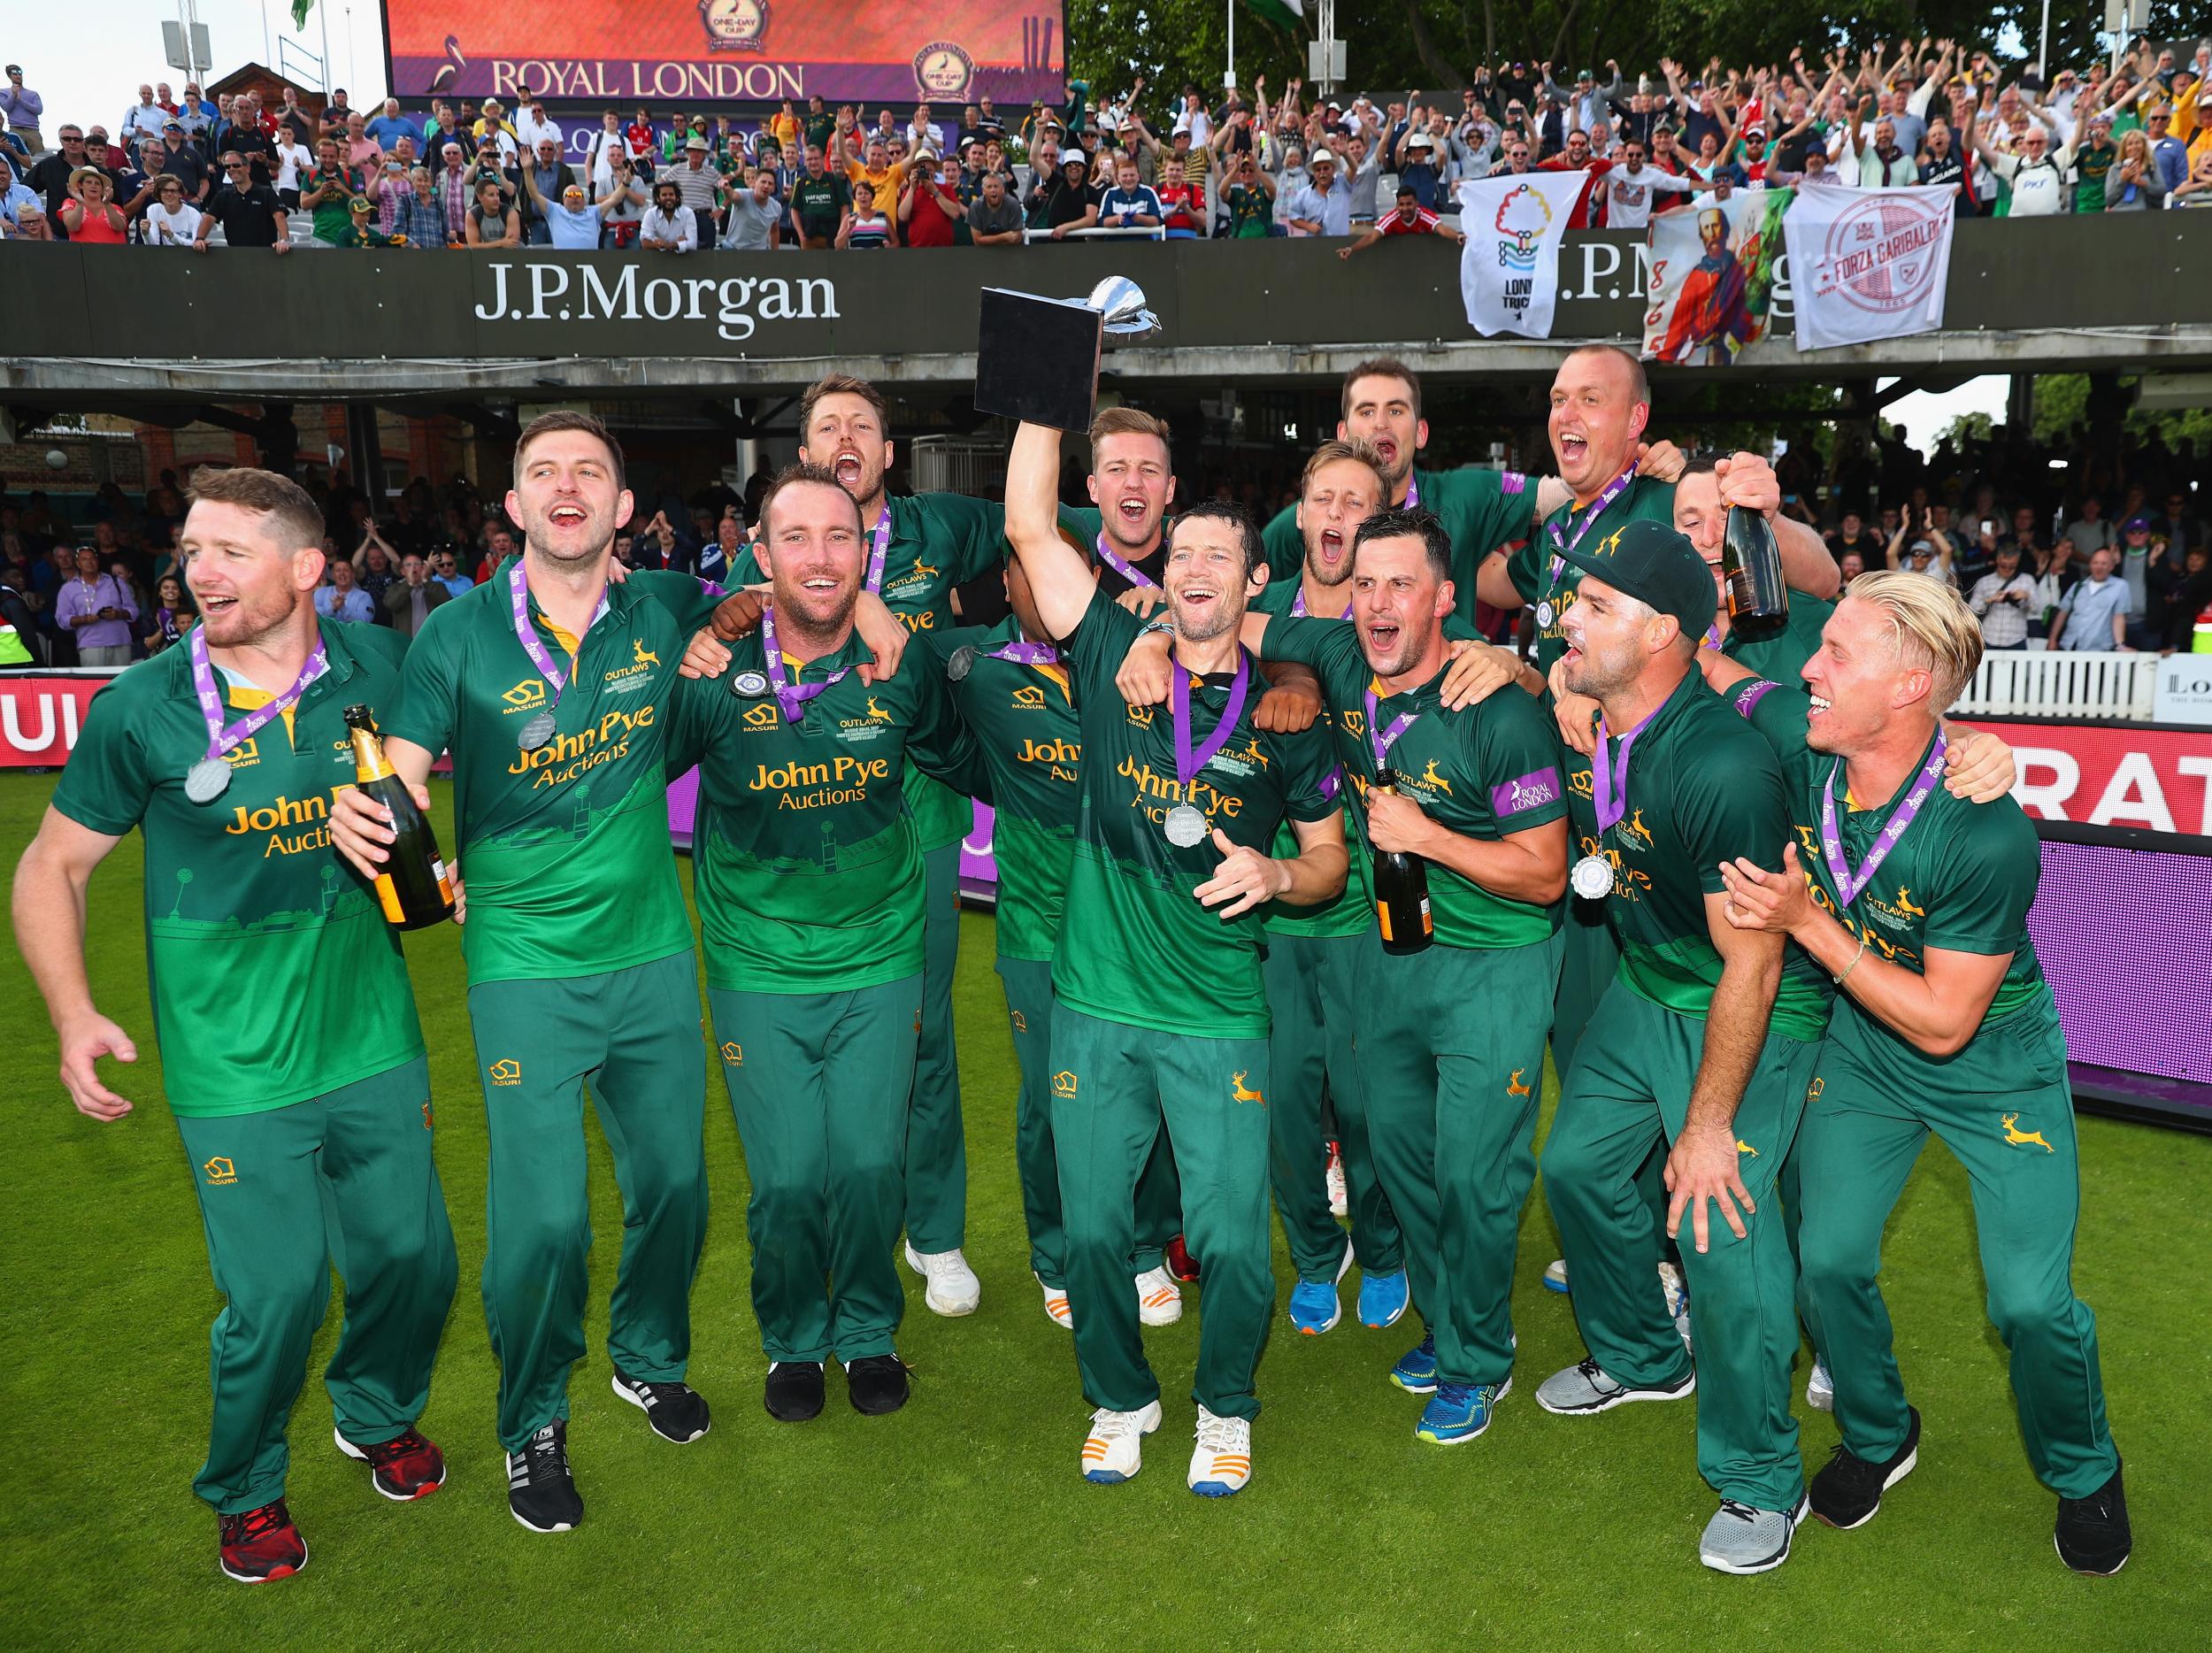 &#13;
Hales helped Notts win their first trophy since 2013 &#13;